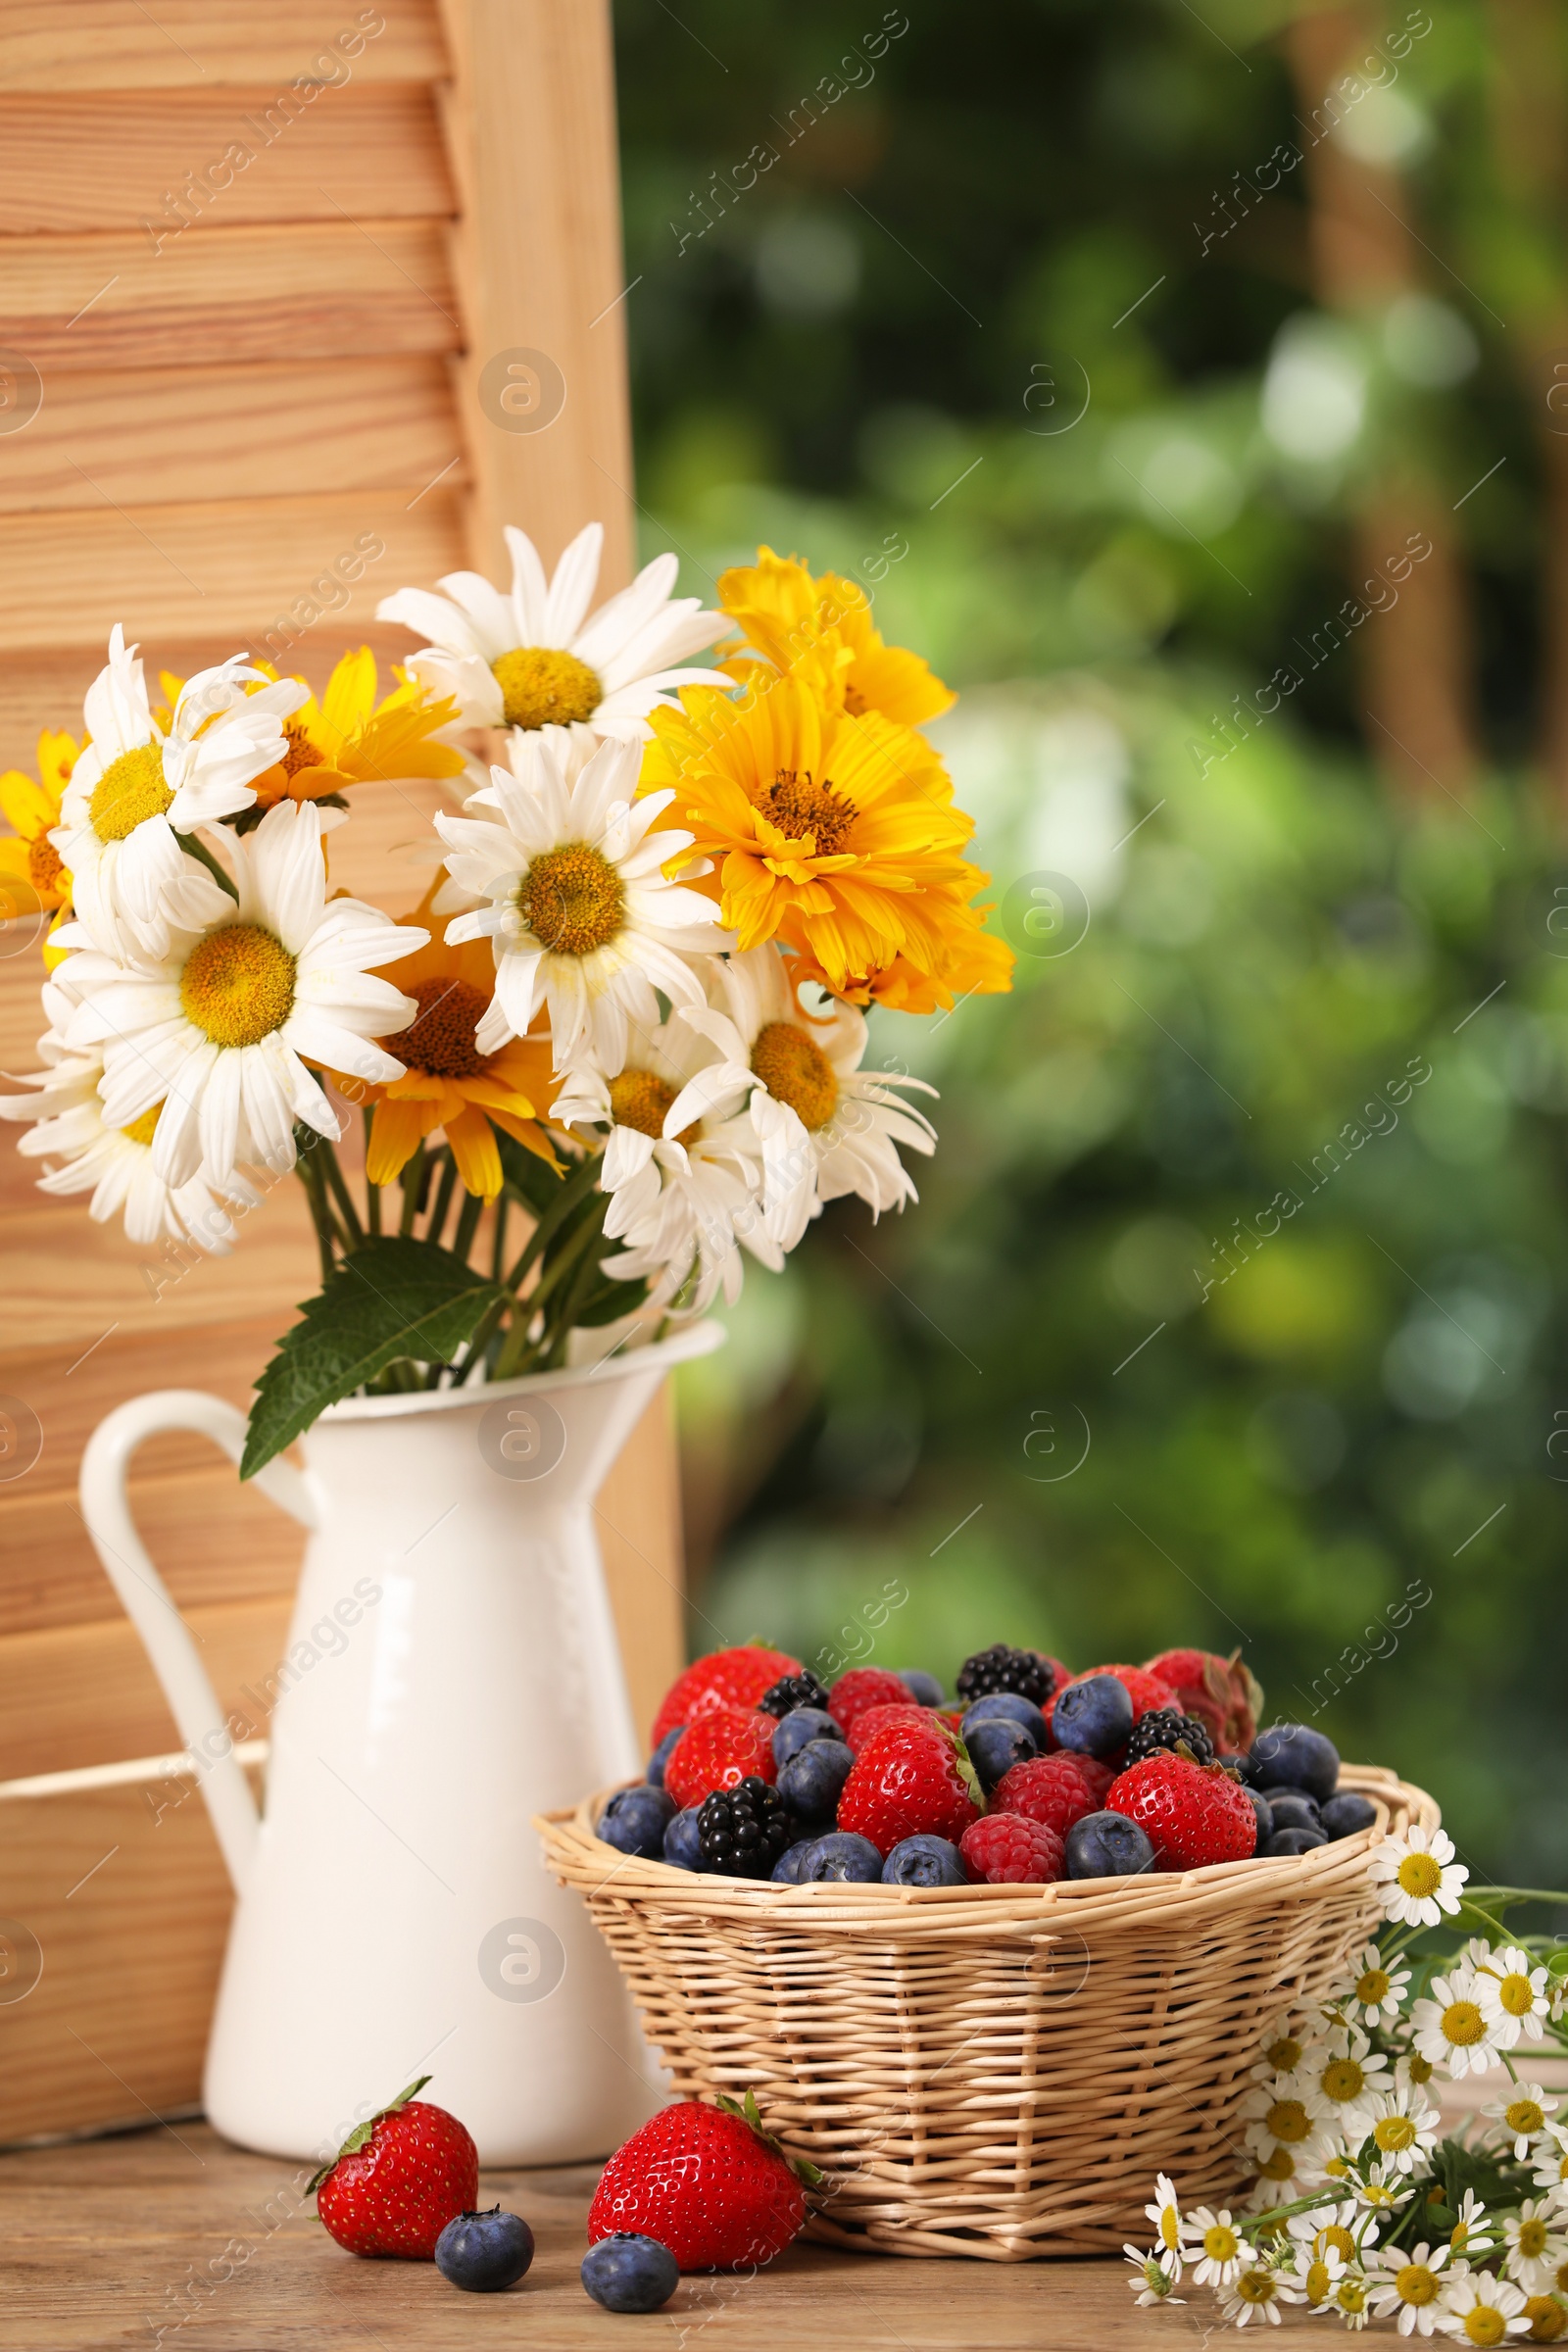 Photo of Wicker bowl with different fresh ripe berries and beautiful flowers on wooden table outdoors